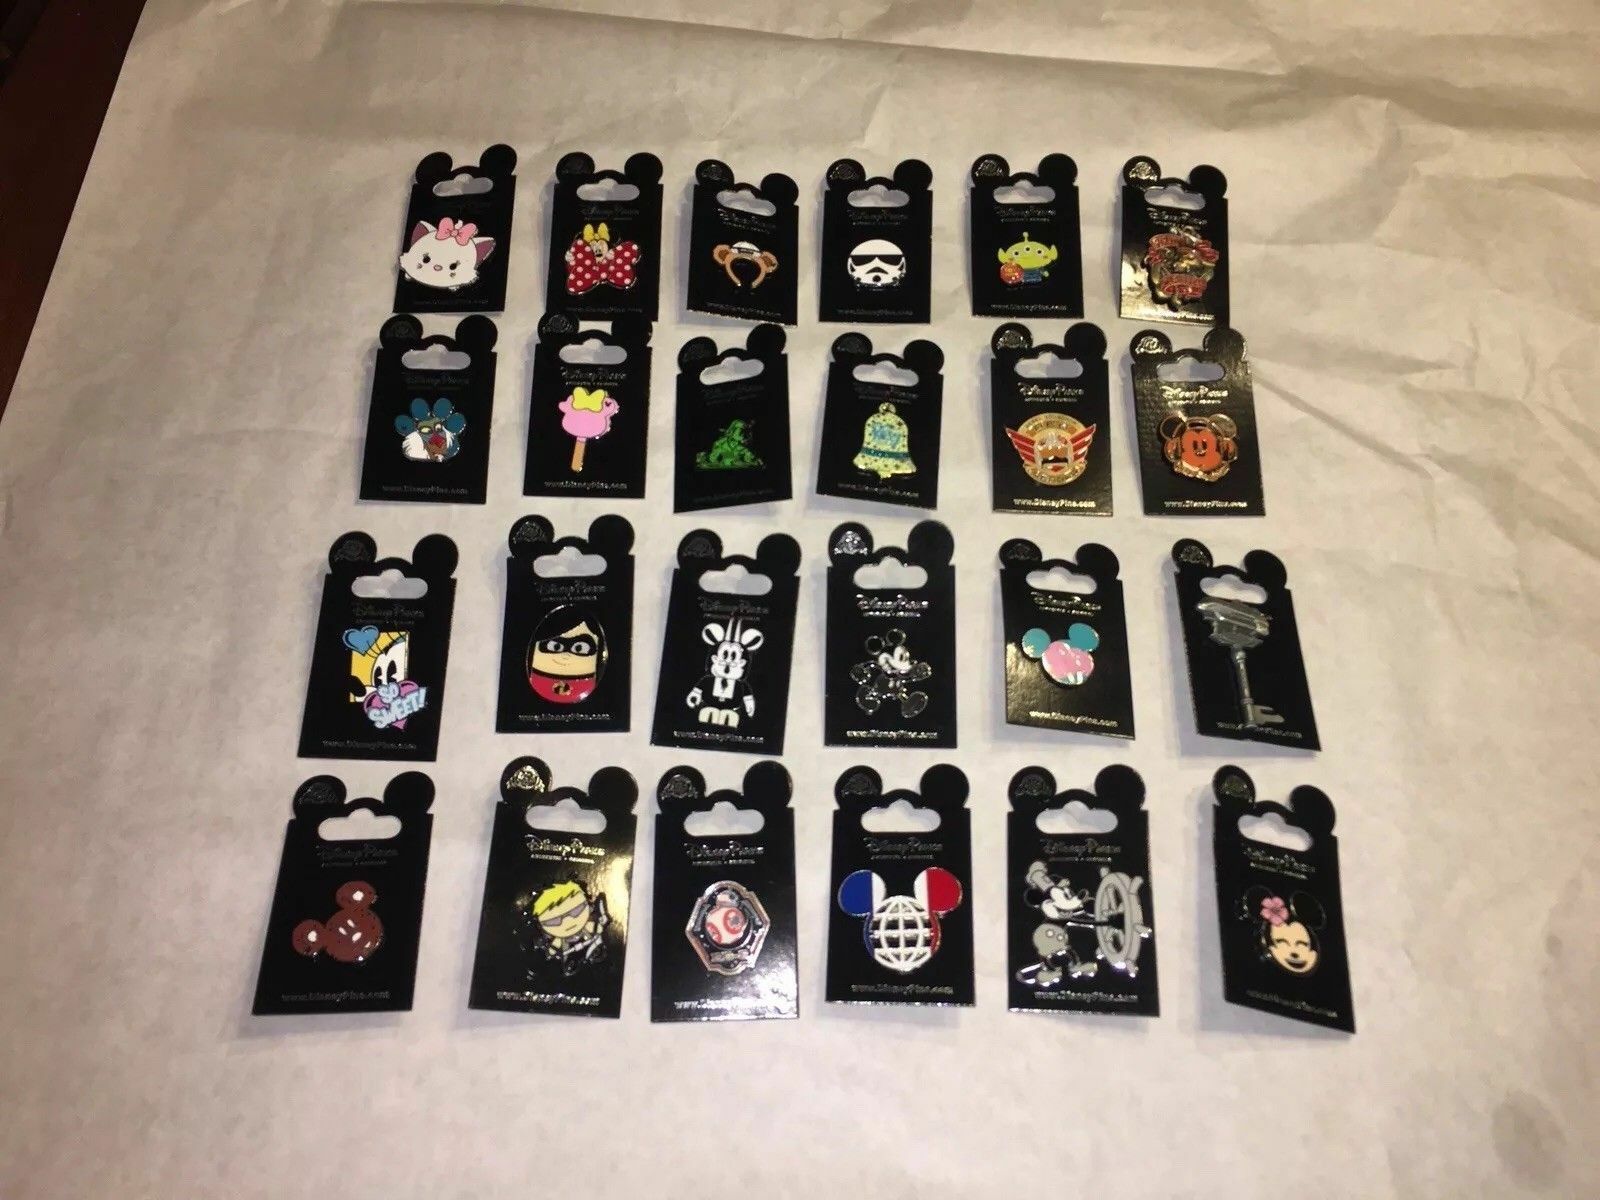 Disney Pins On Cards Lot (10 15 20 30 50 100) Any Size Lot! $3.49 For Each Pin